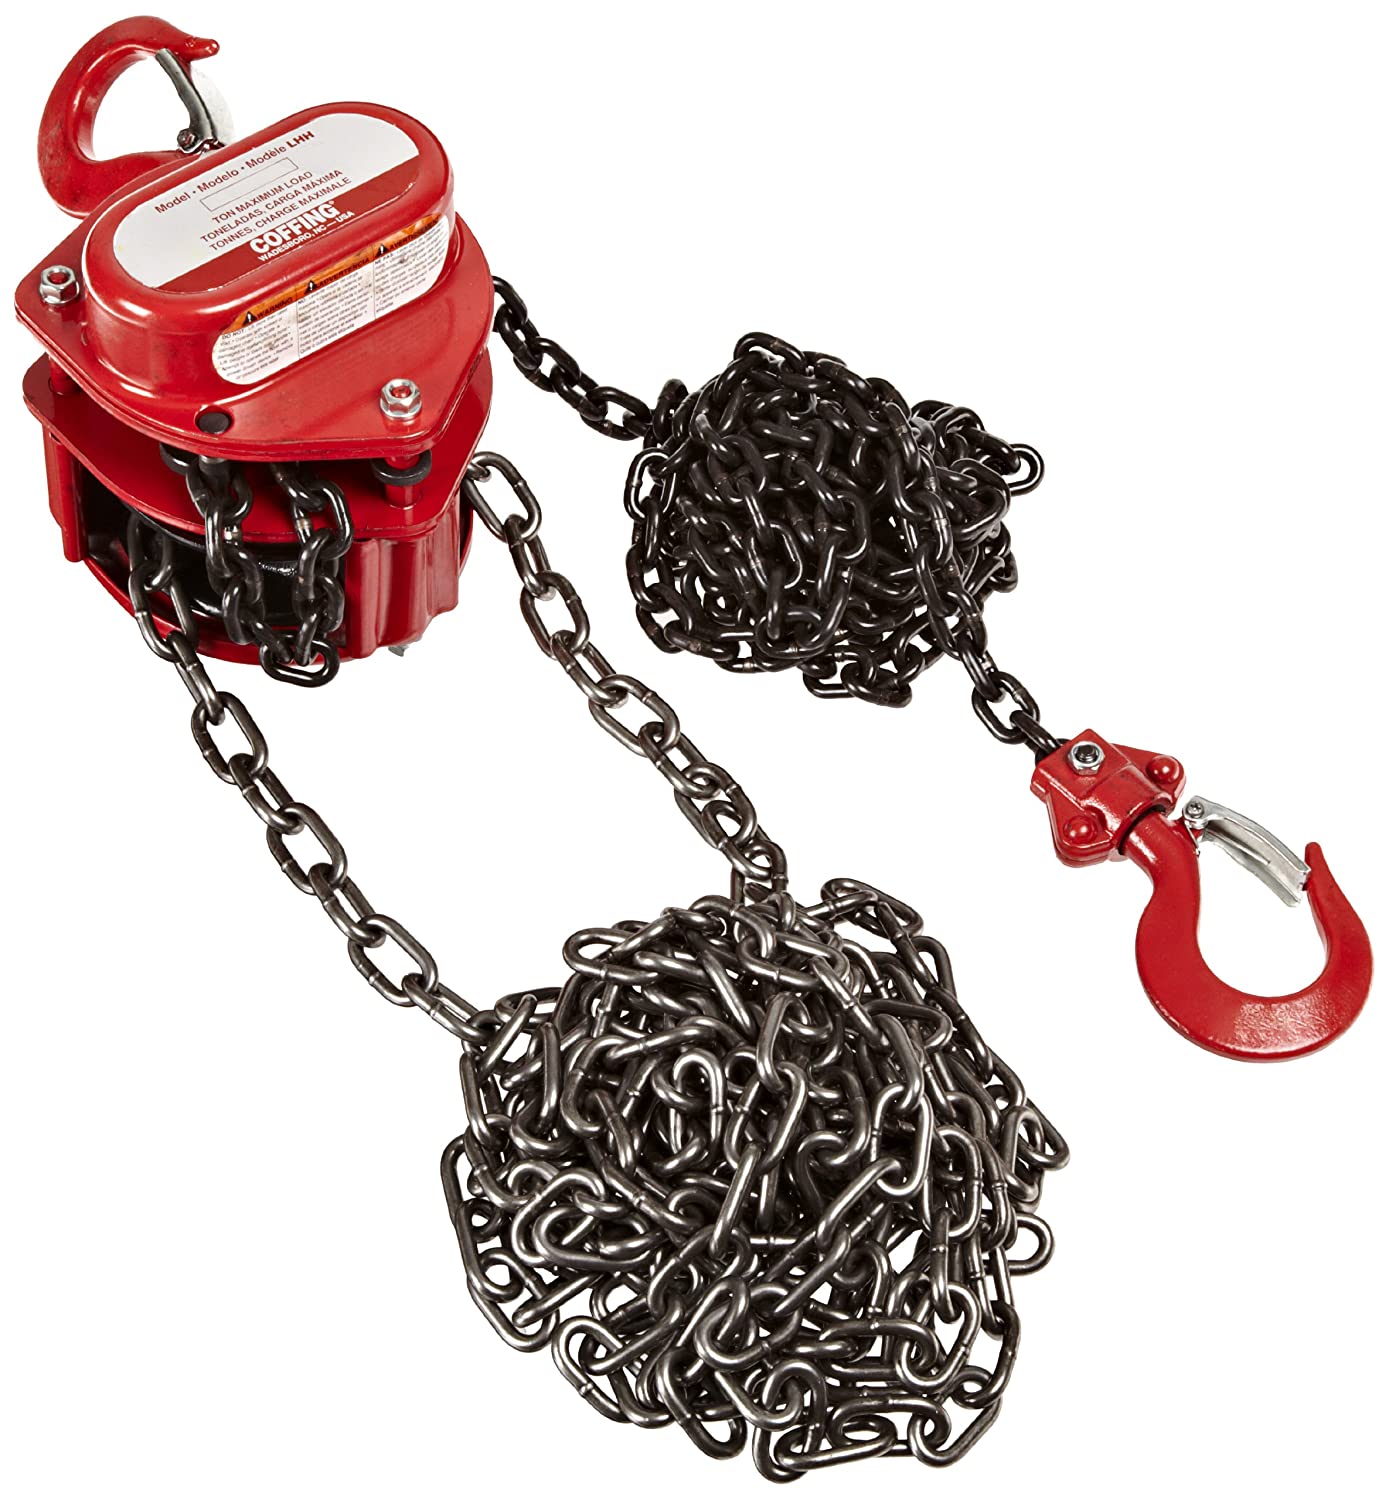 Coffing Hoists 08912W LHH-1B-20FT Steel Hand Chain Hoist with Hook, 20' Lifting Height, 1 Ton Load Capacity